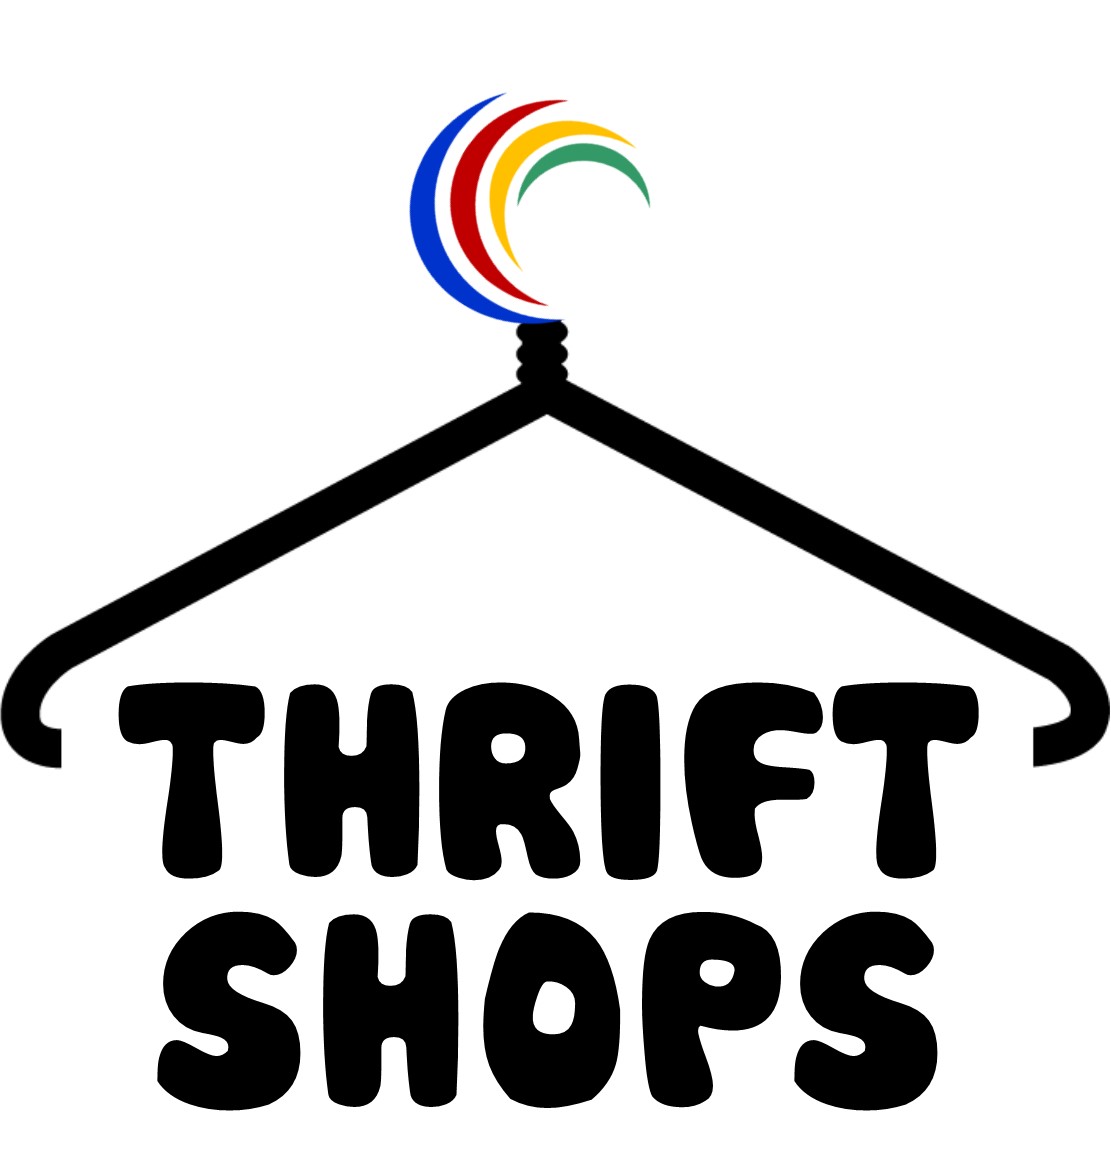 Home made shop. Store логотип. Трифт стор. Thrift Store logo. Clothing Store logo.